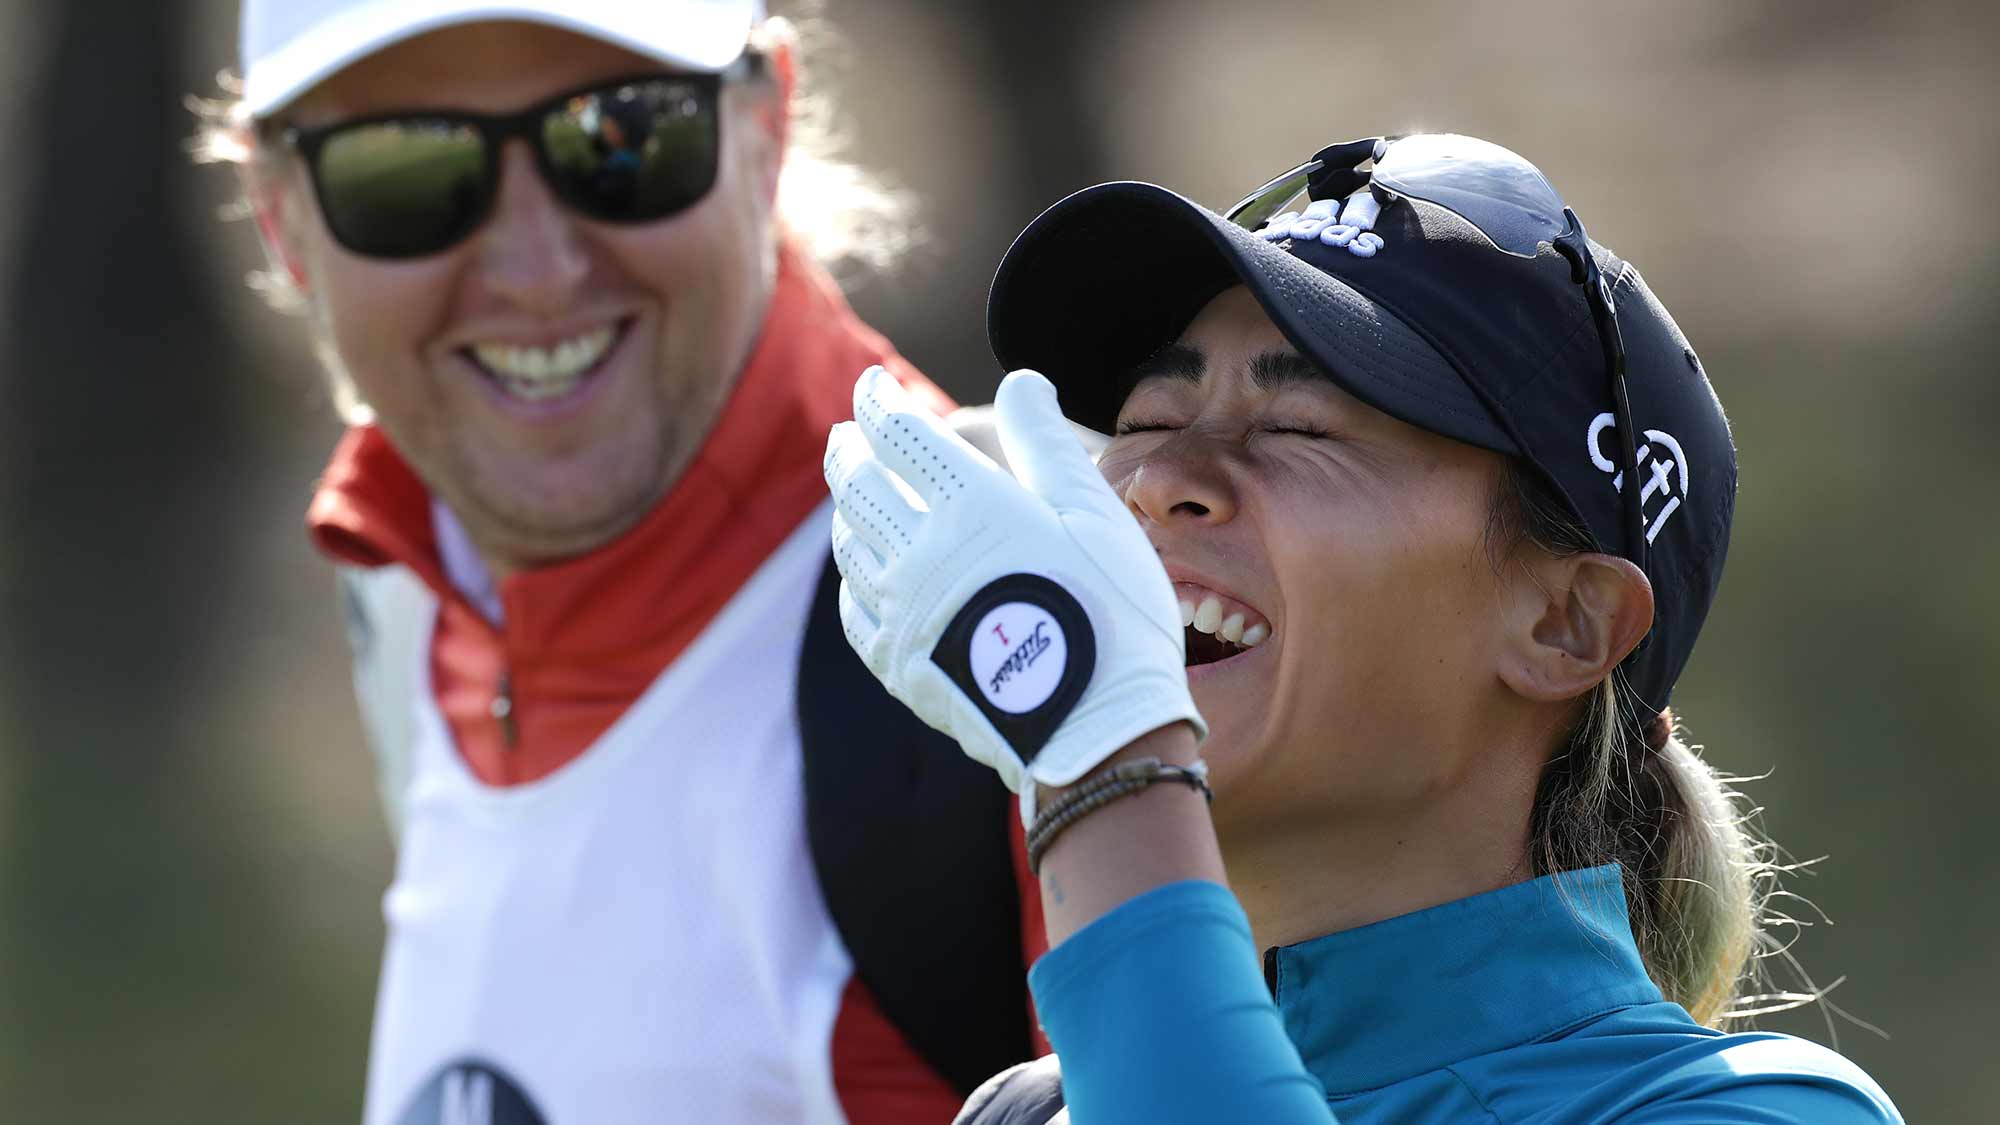 Danielle Kang of USA smiles on the first hole during the final Round of 2019 BMW Ladies Championship at LPGA International Busan on October 27, 2019 in Busan, Republic of Korea